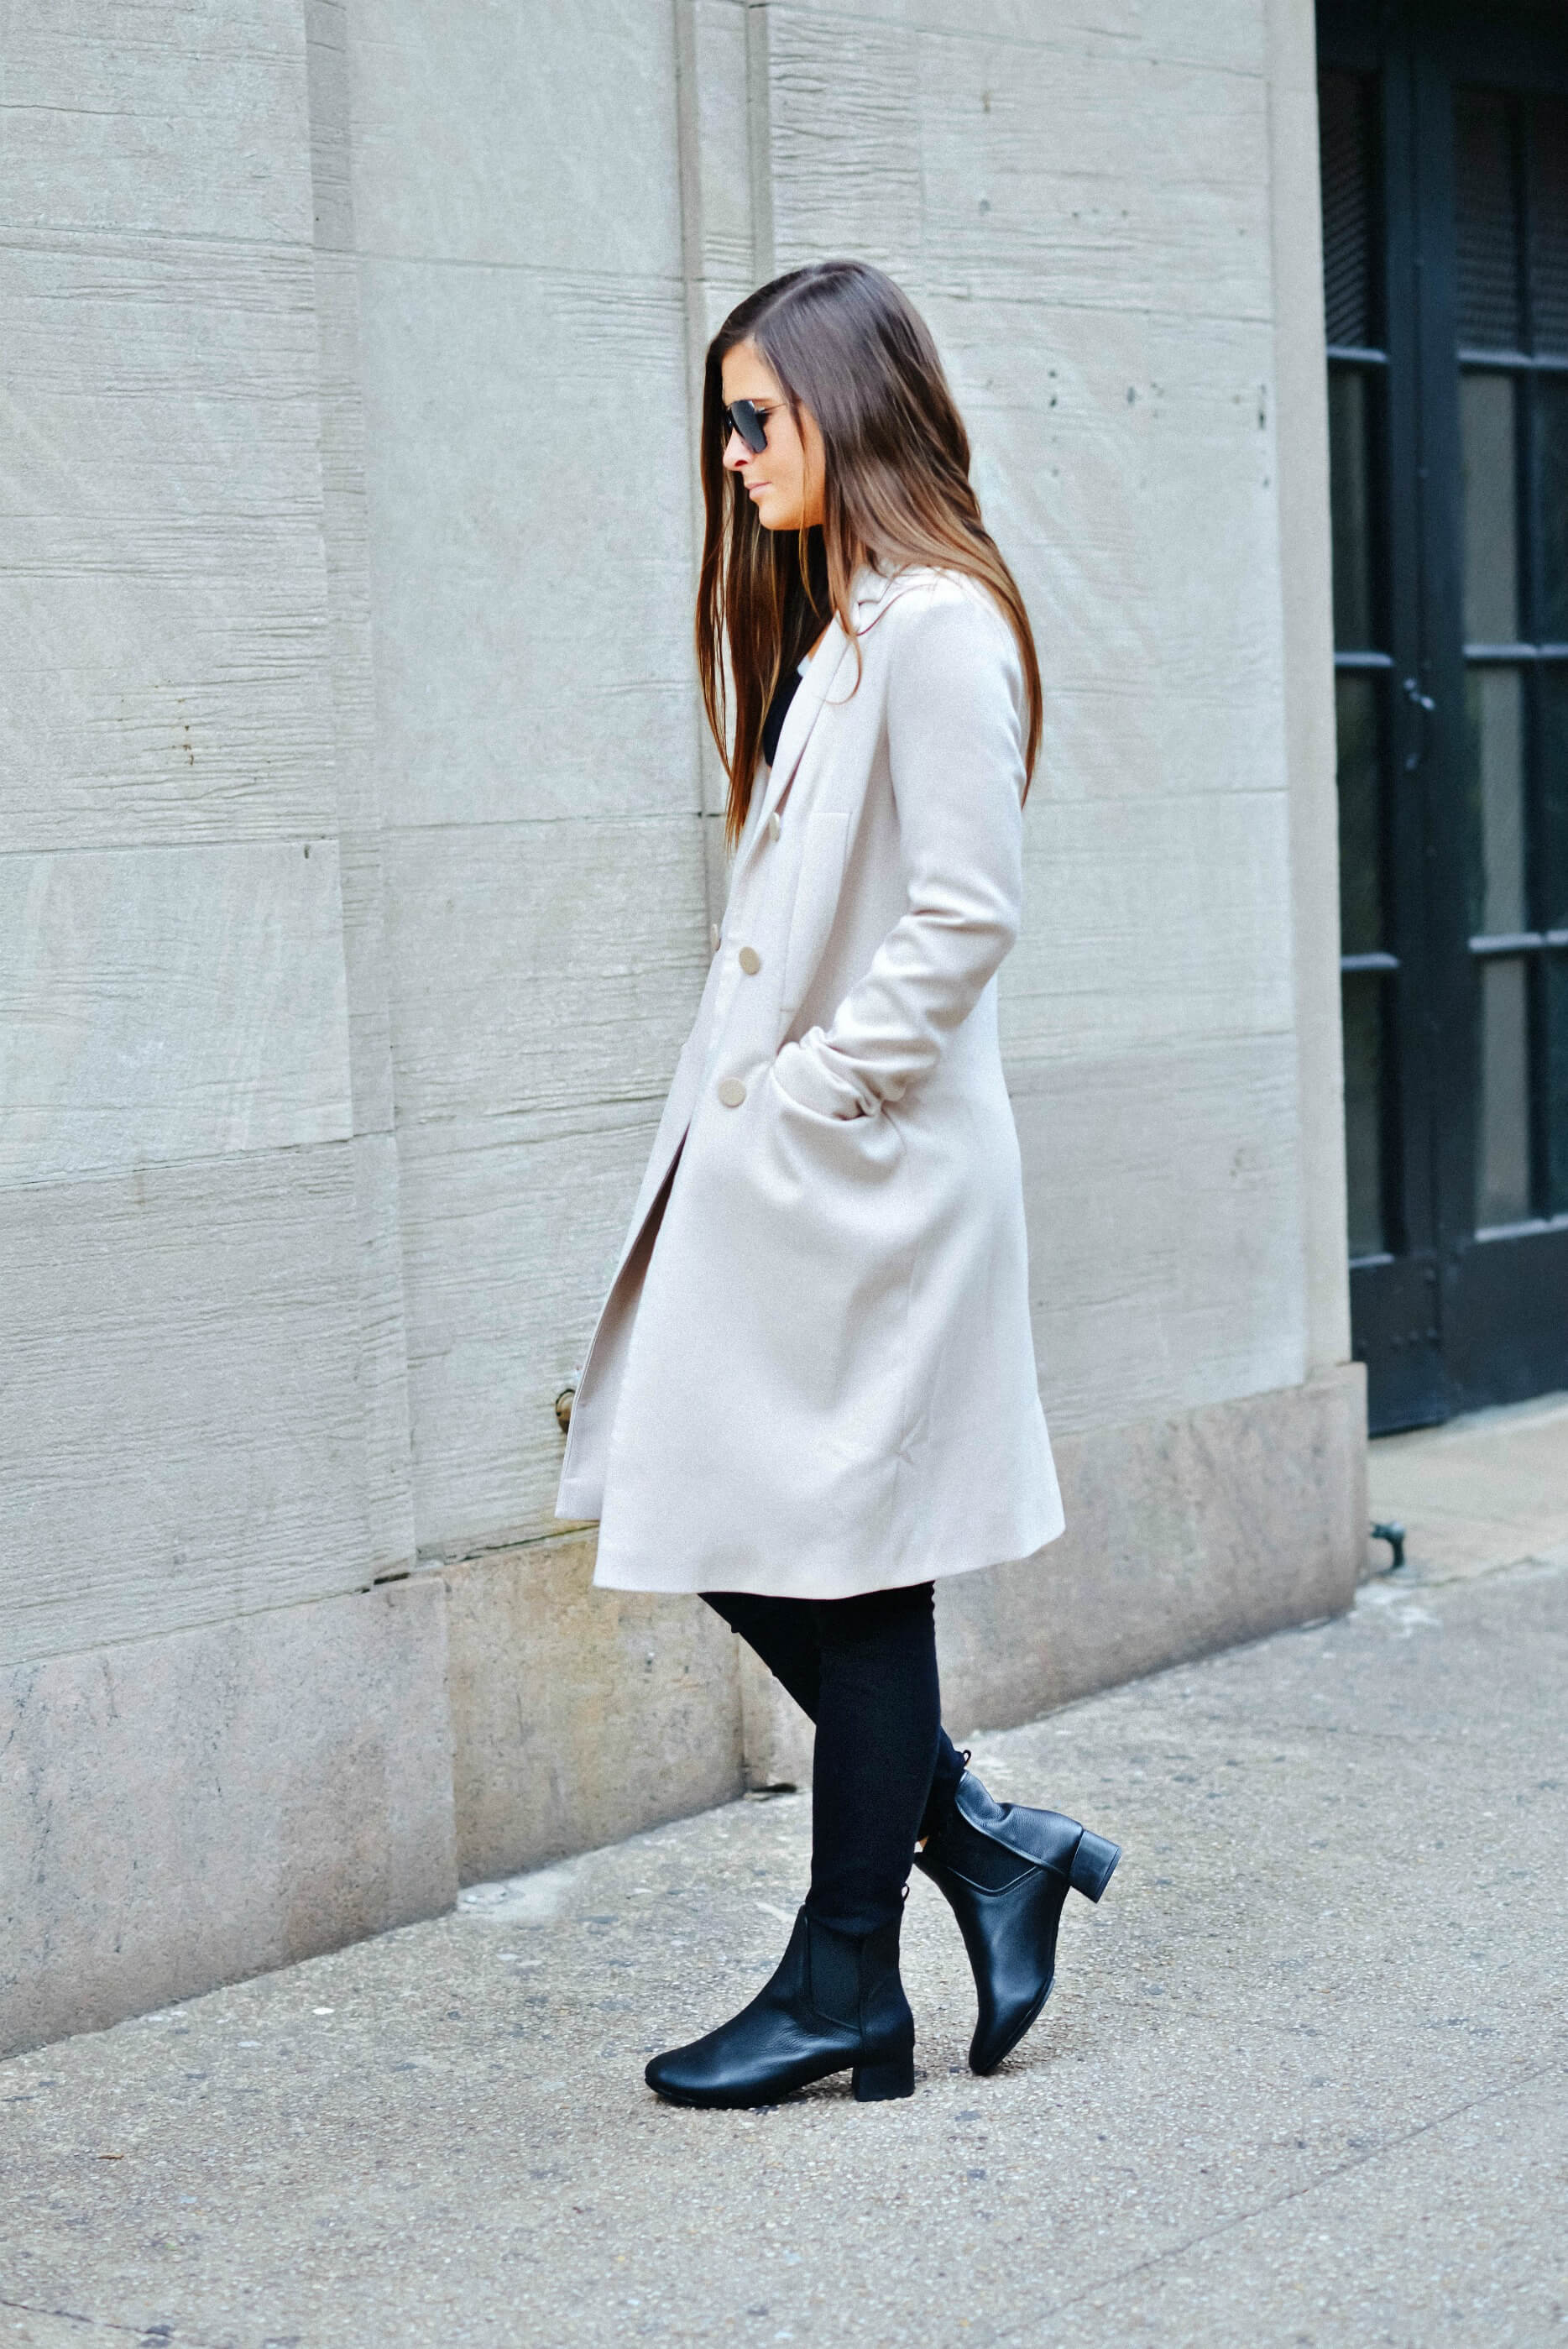 Fall Outfit Inspiration, Duster Coat, Black Jeans, Black Chelsea Boots, Tilden of To Be Bright